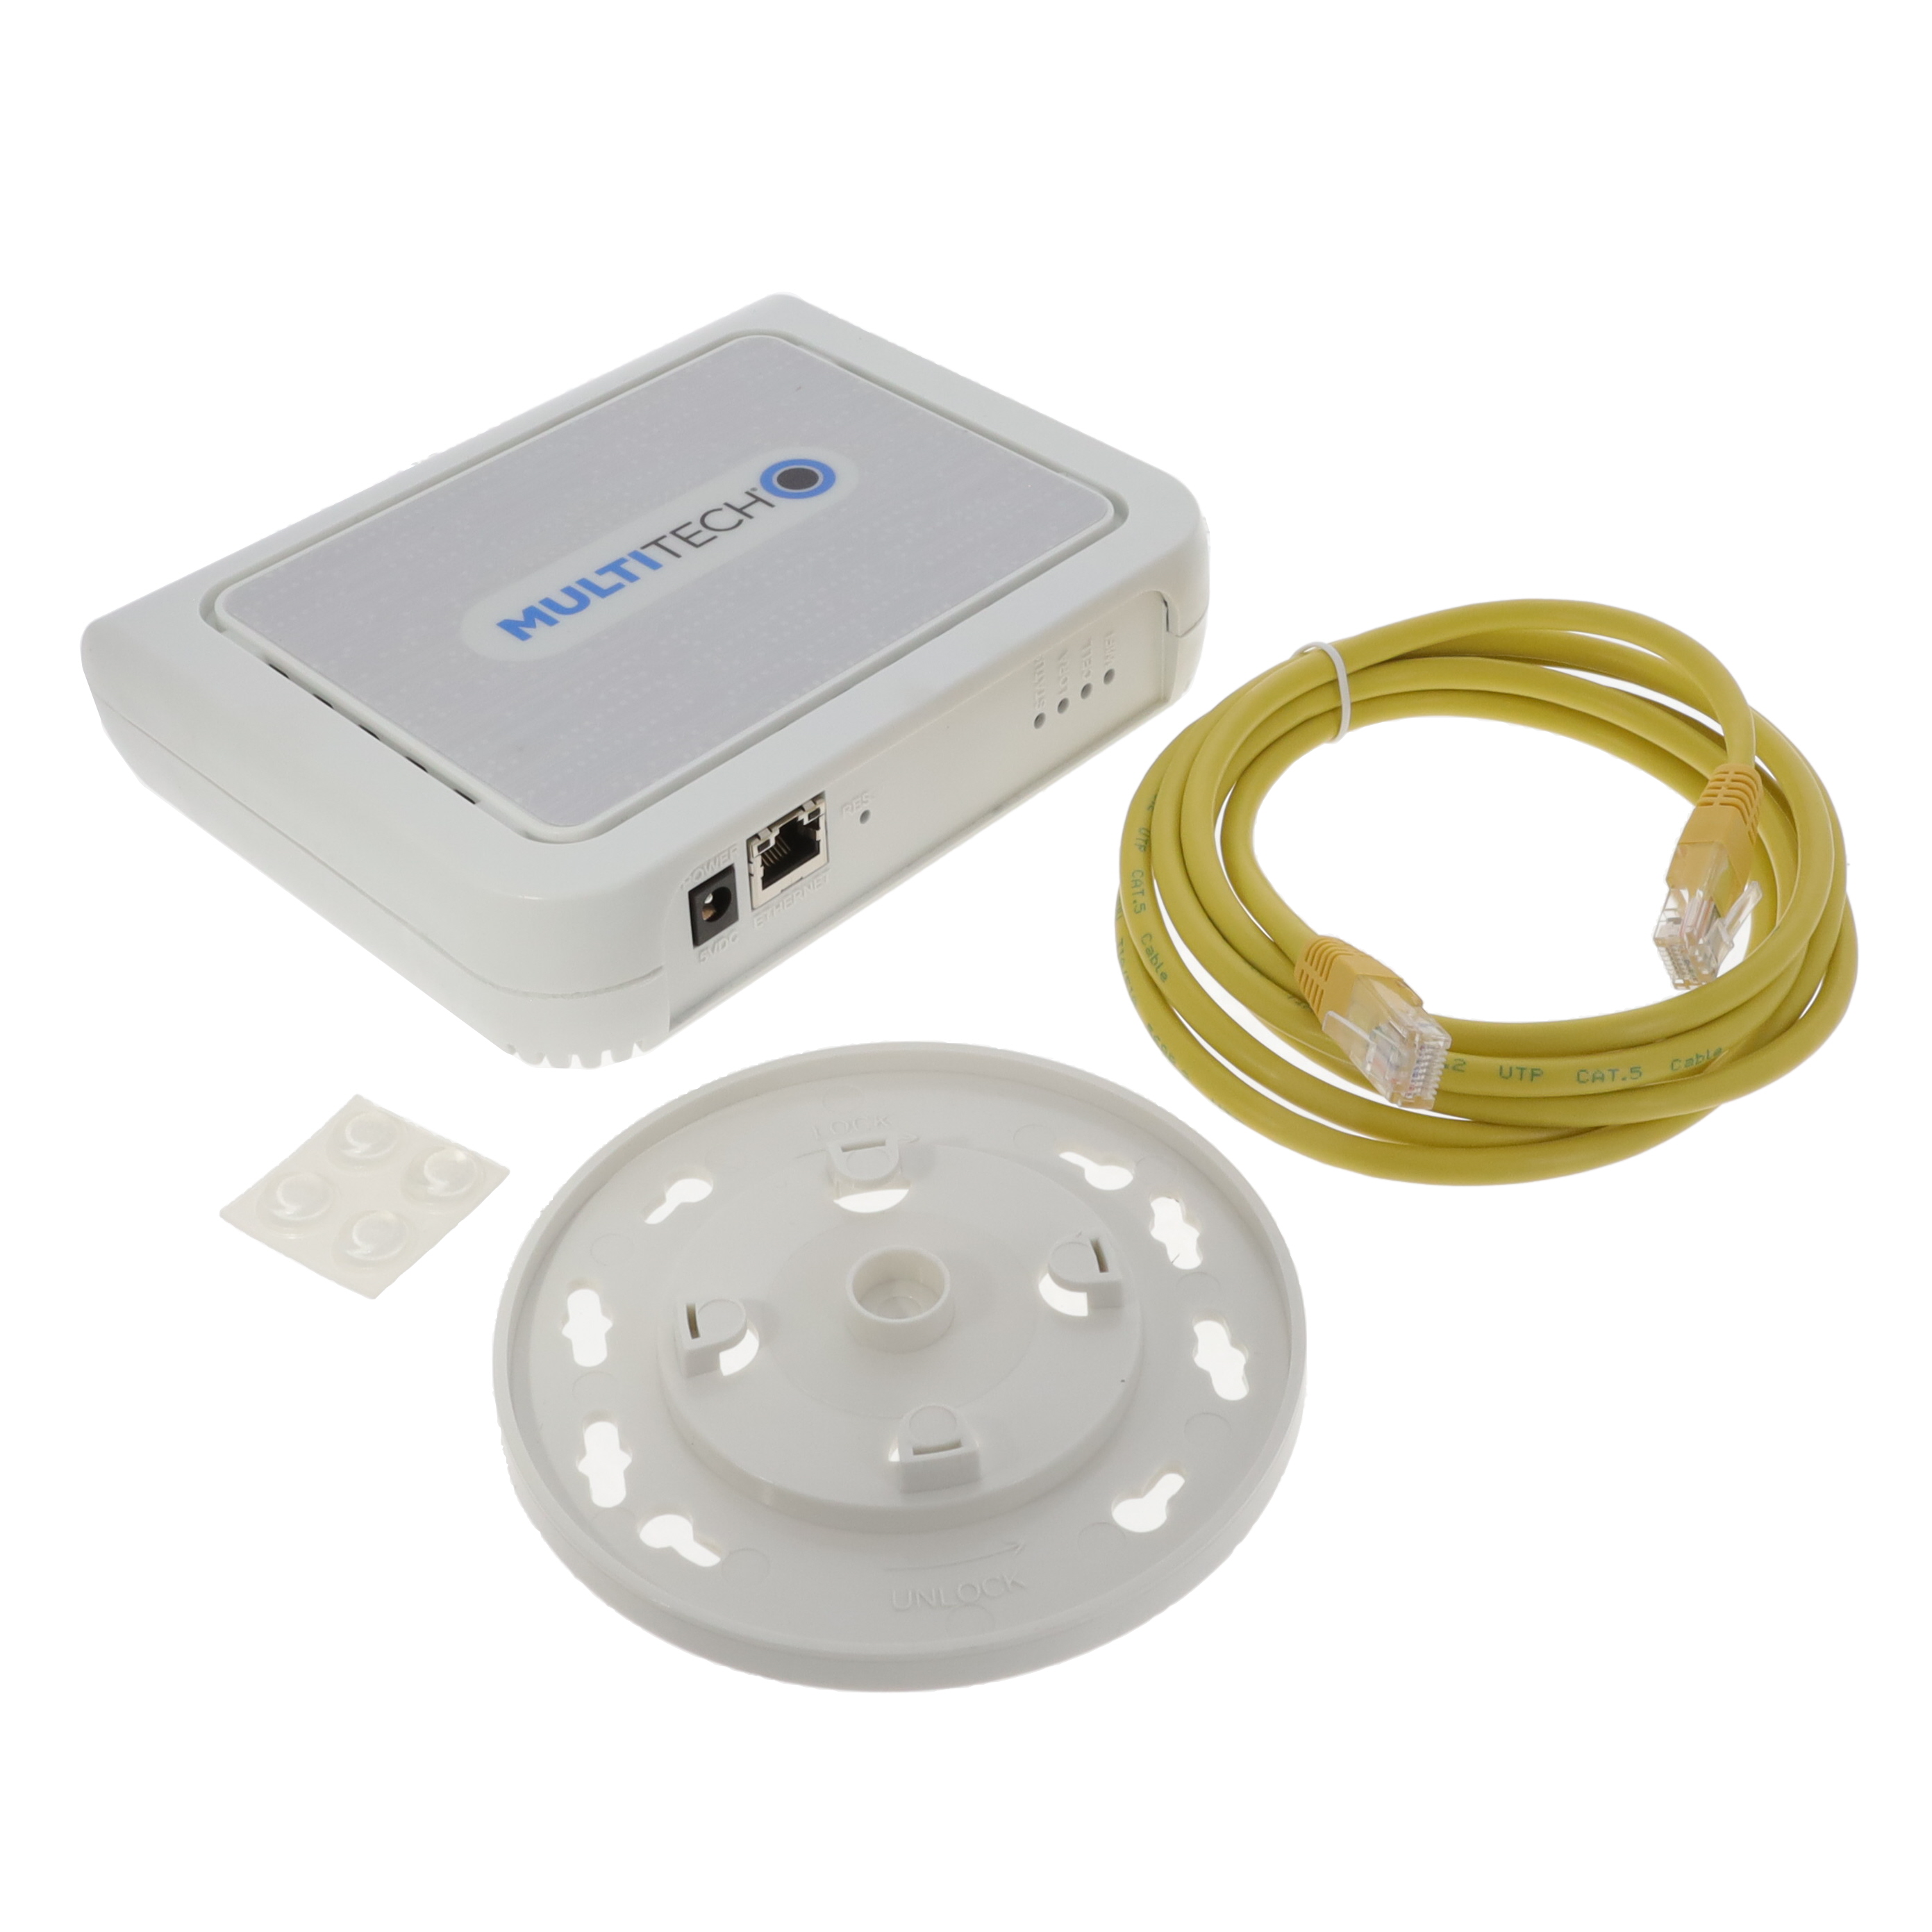 【MTCAP2-868-002A-POE】ETHERNET ONLY ACCESS POINT 8-CHA